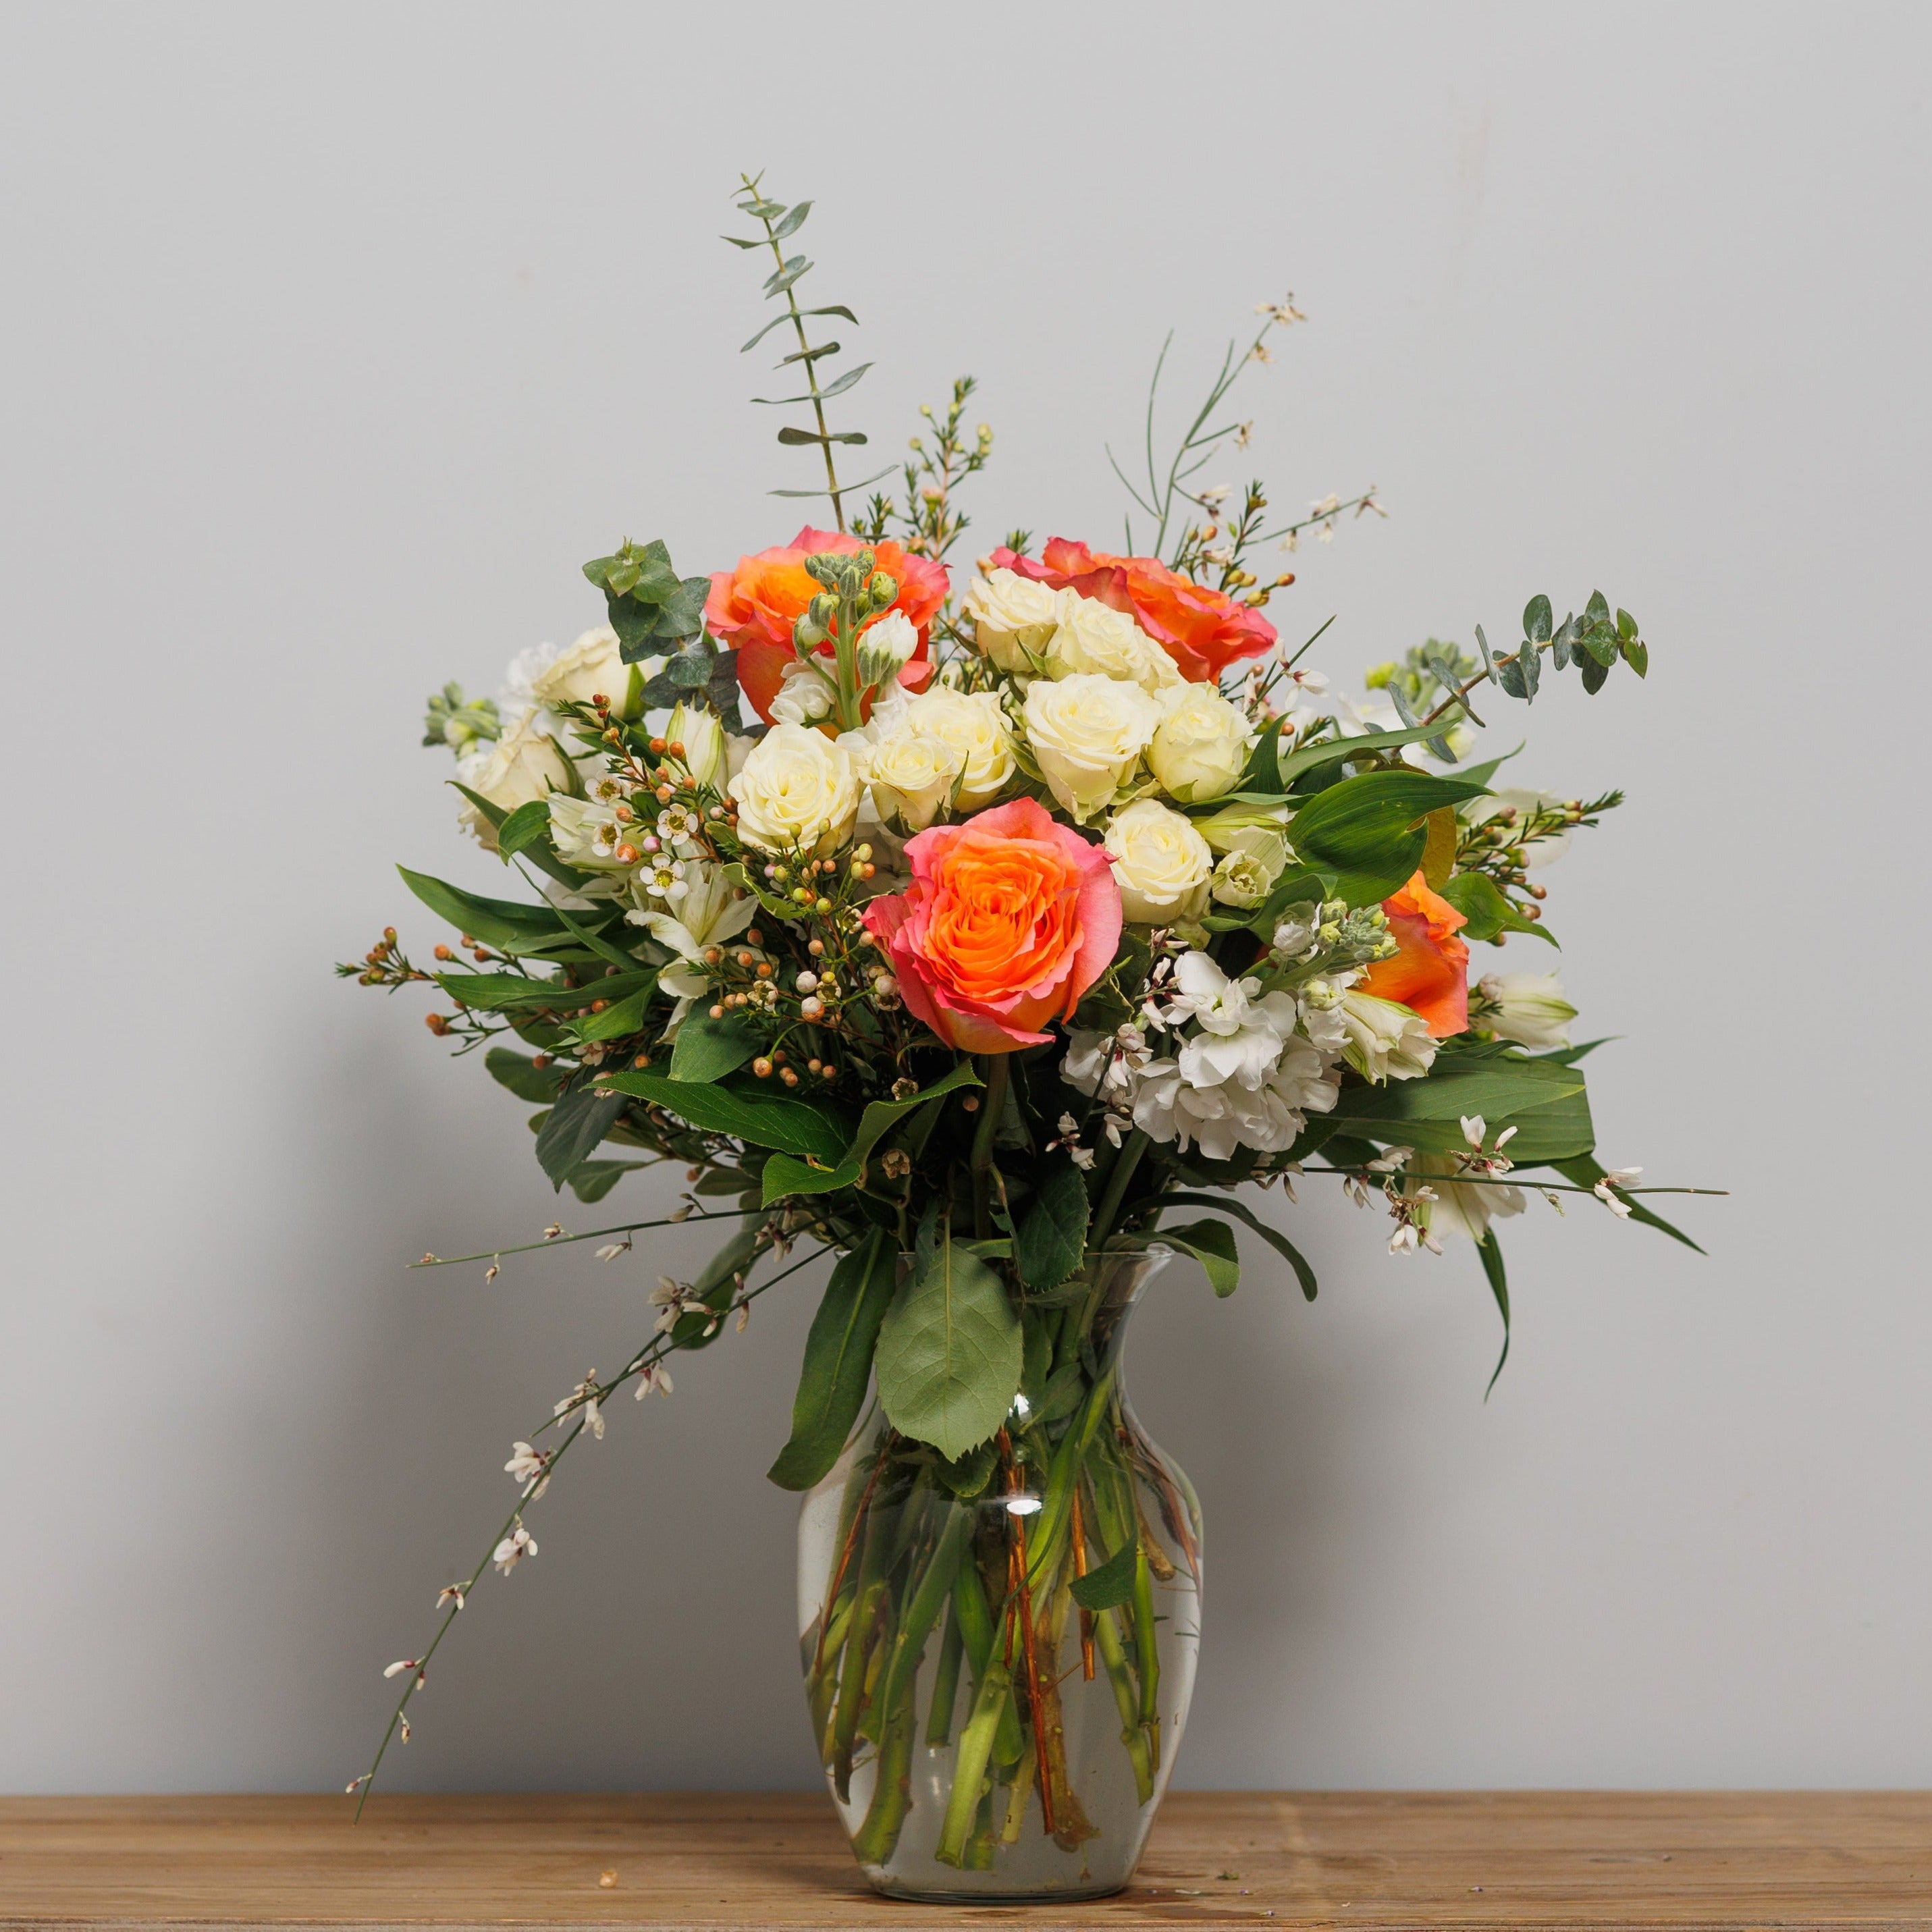 An arrangement with white spray roses, white alstroemeria and Free Spirit roses. 